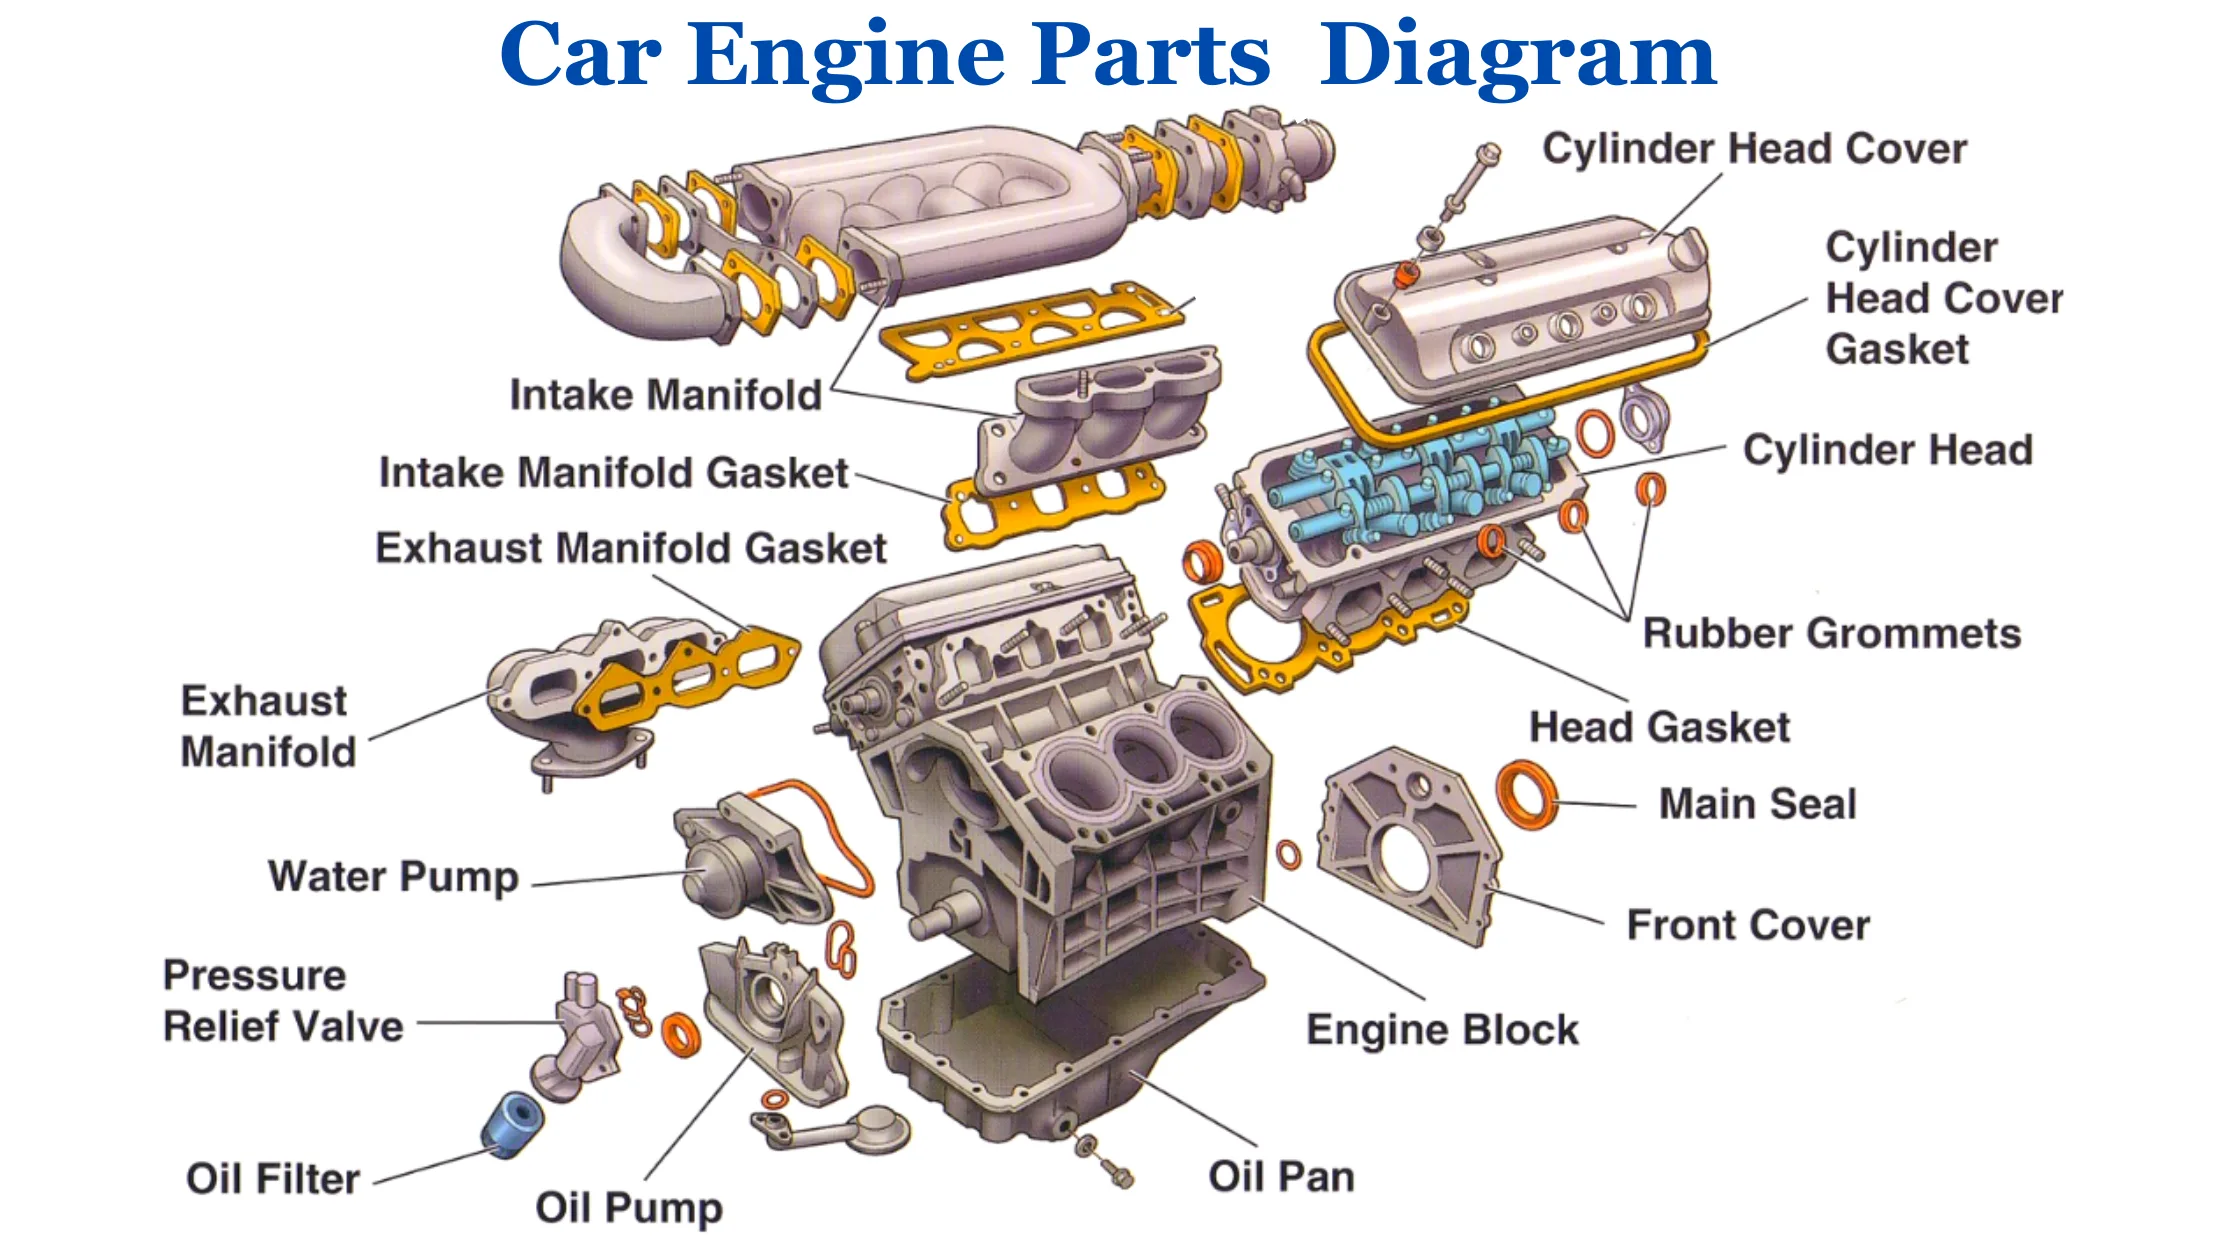 Car Engine Parts Names with Diagram